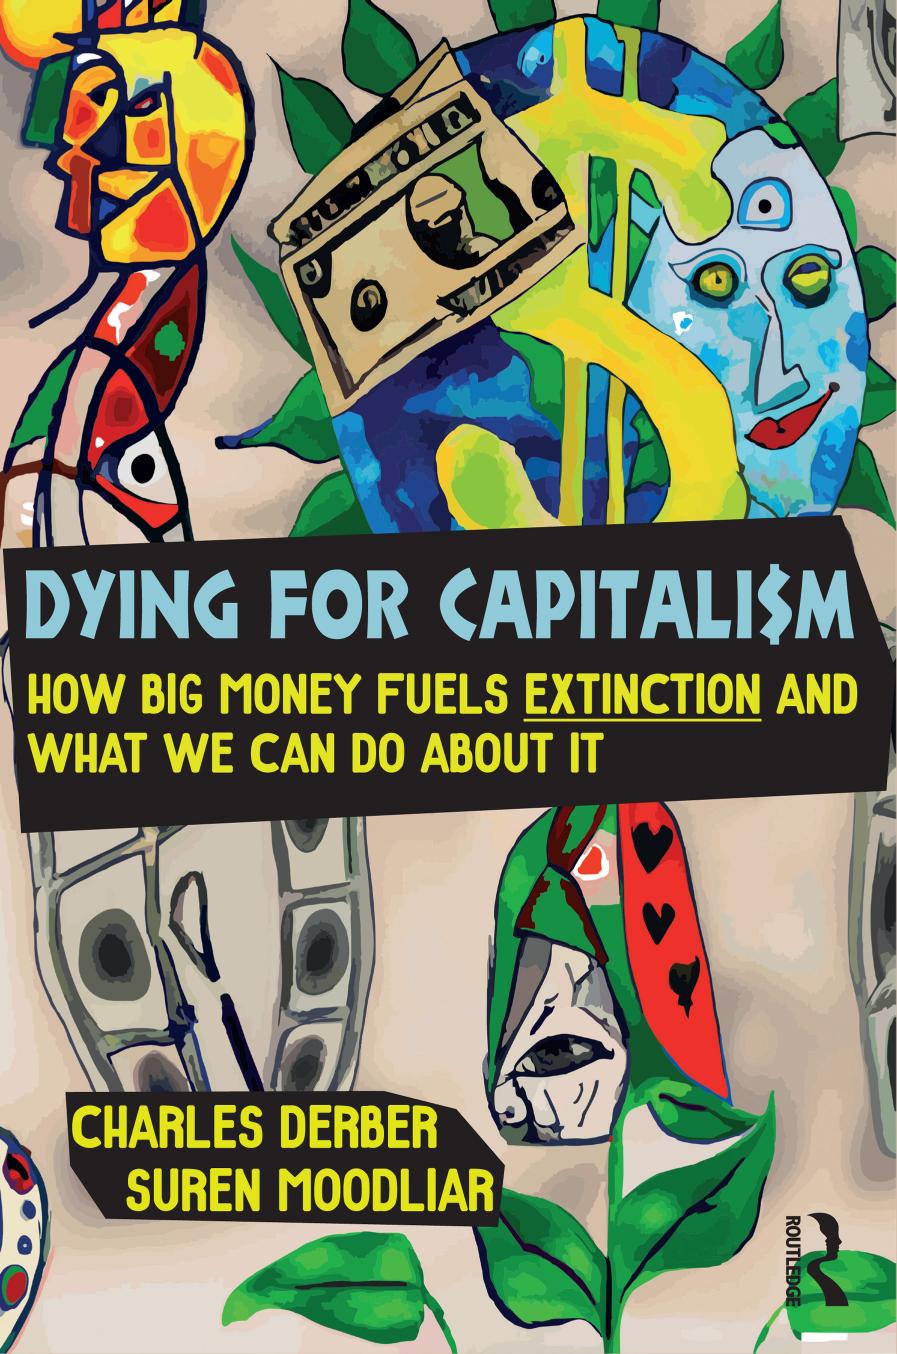 Dying for Capitalism: How Big Money Fuels Extinction and What We Can Do About It by Charles Derber Suren Moodliar